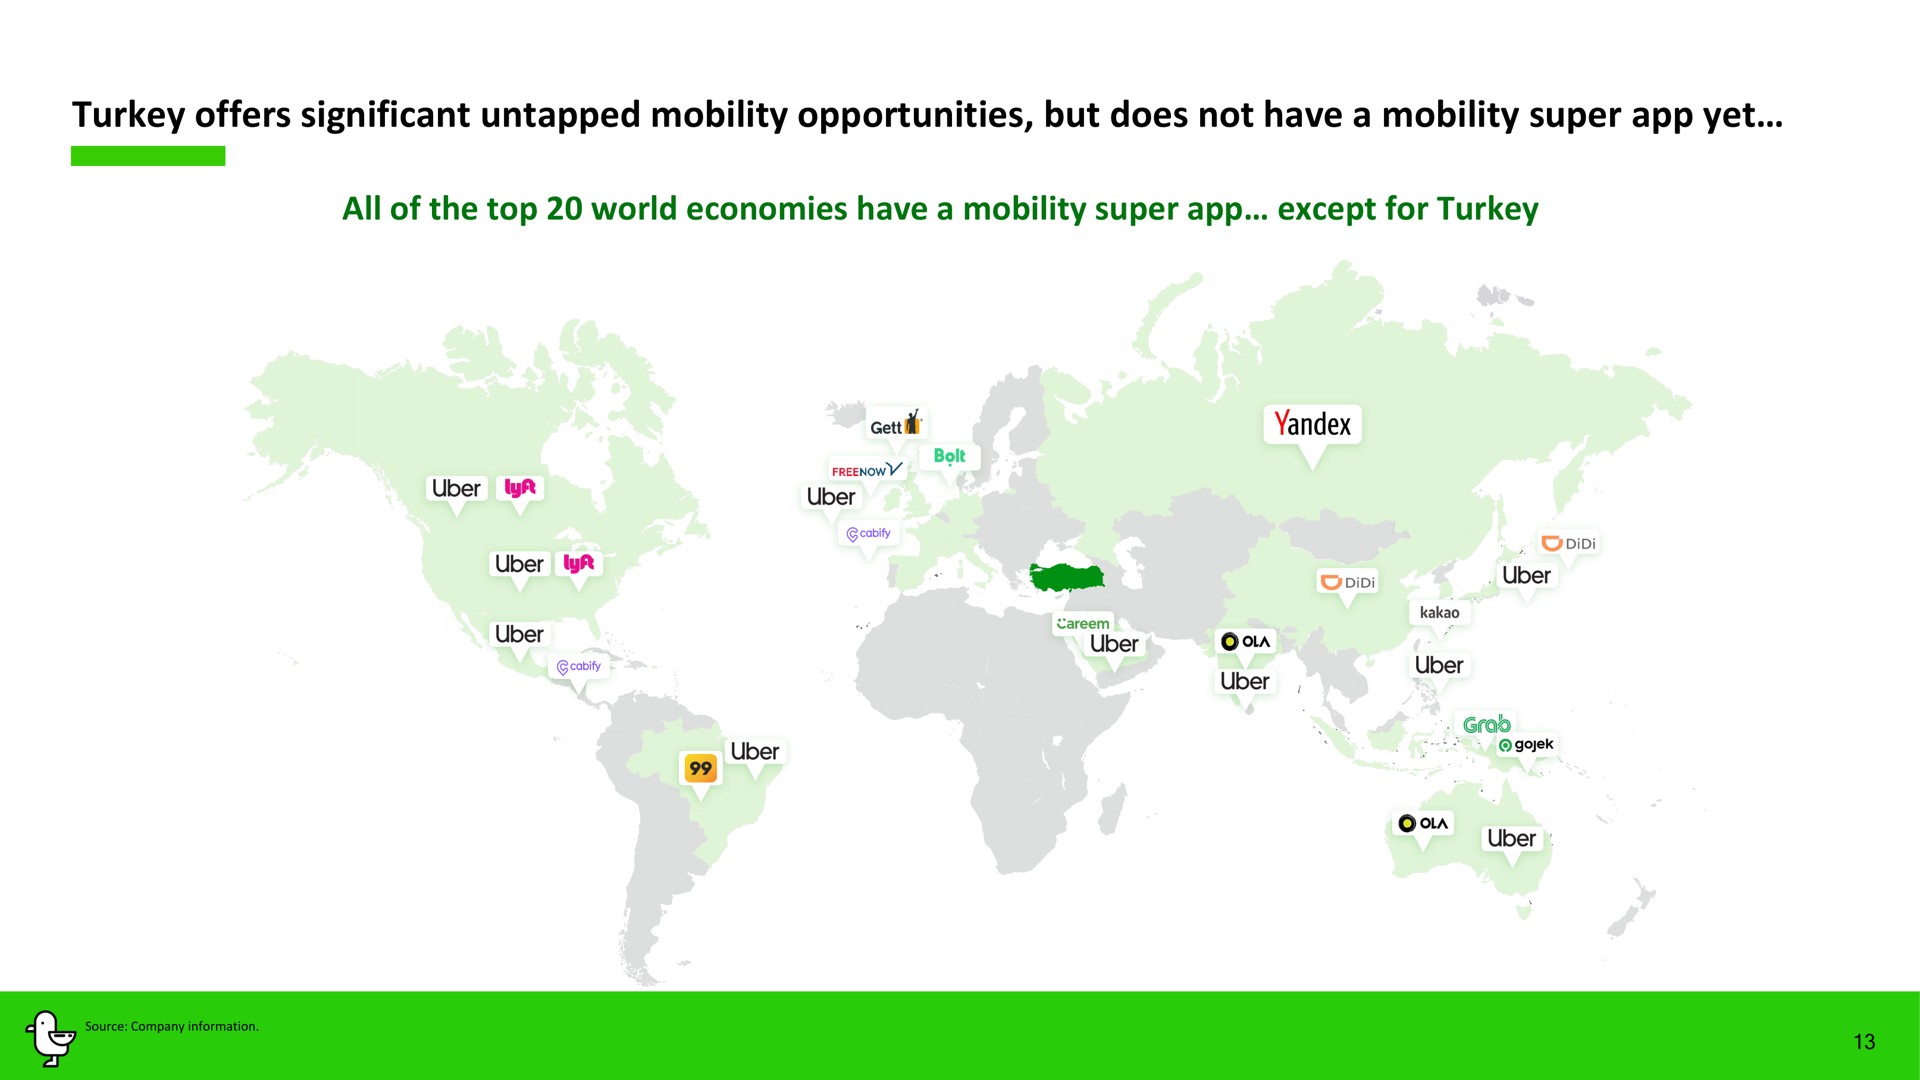 turkey offers significant untapped mobility opportunities but does not have a mobility super yet all of the top world economies have a mobility super except for turkey | Marti